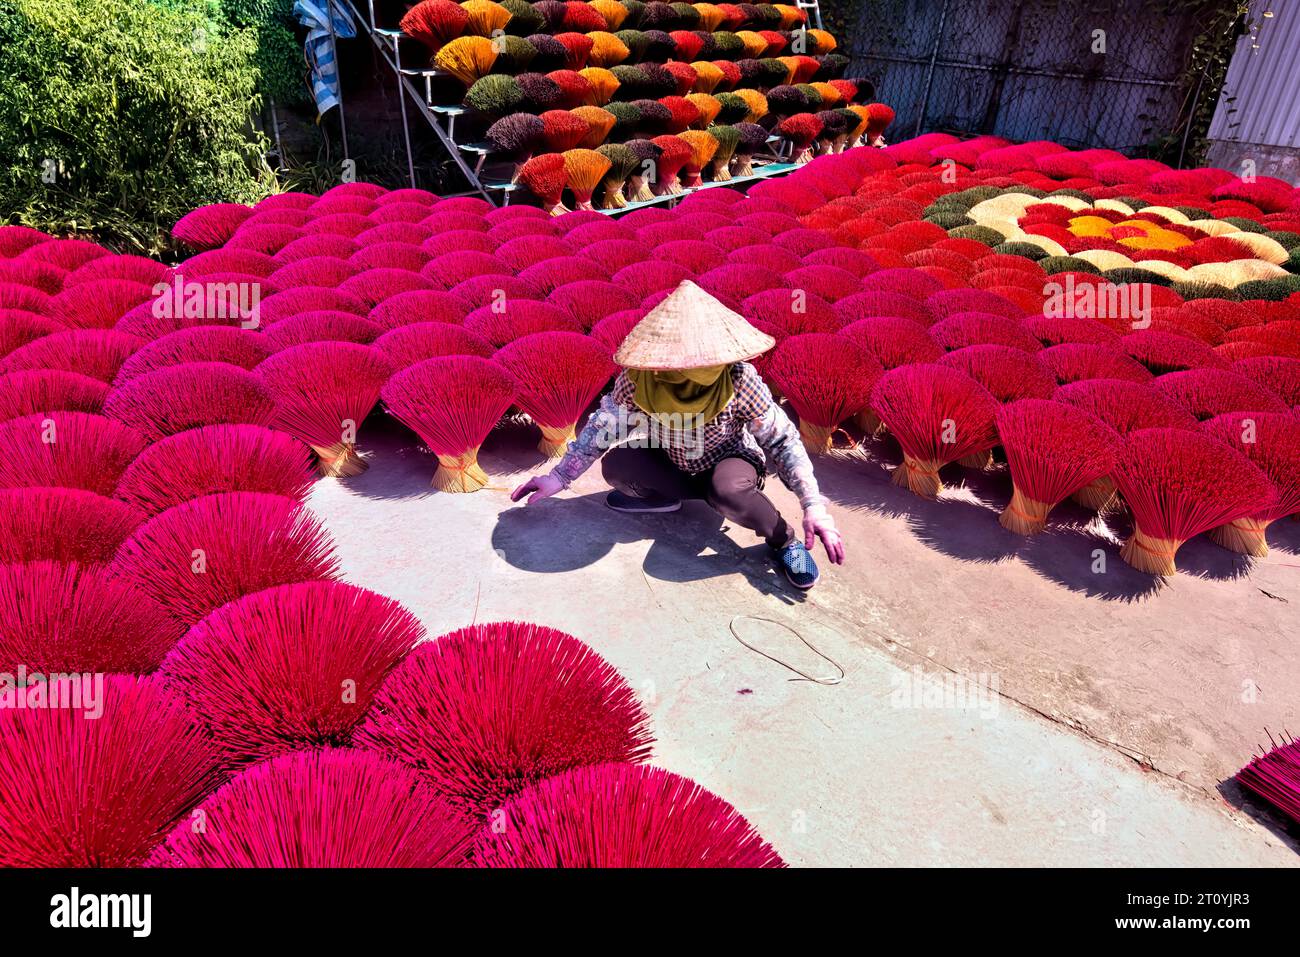 Worker drying incense in the Quang Phu Cau incense village, Hanoi, Vietnam Stock Photo